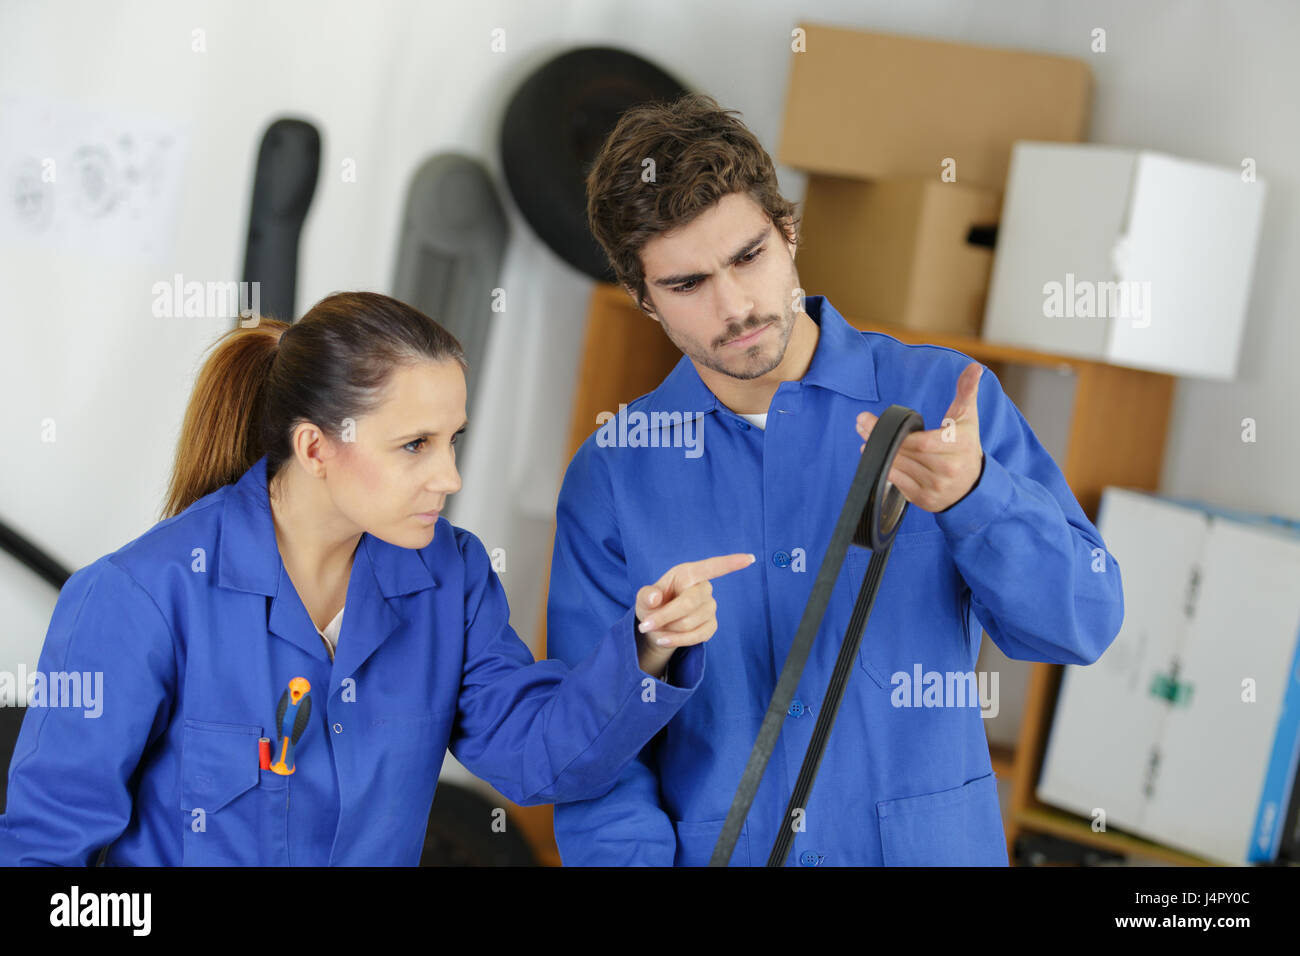 Engineers looking at rubber gasket Stock Photo